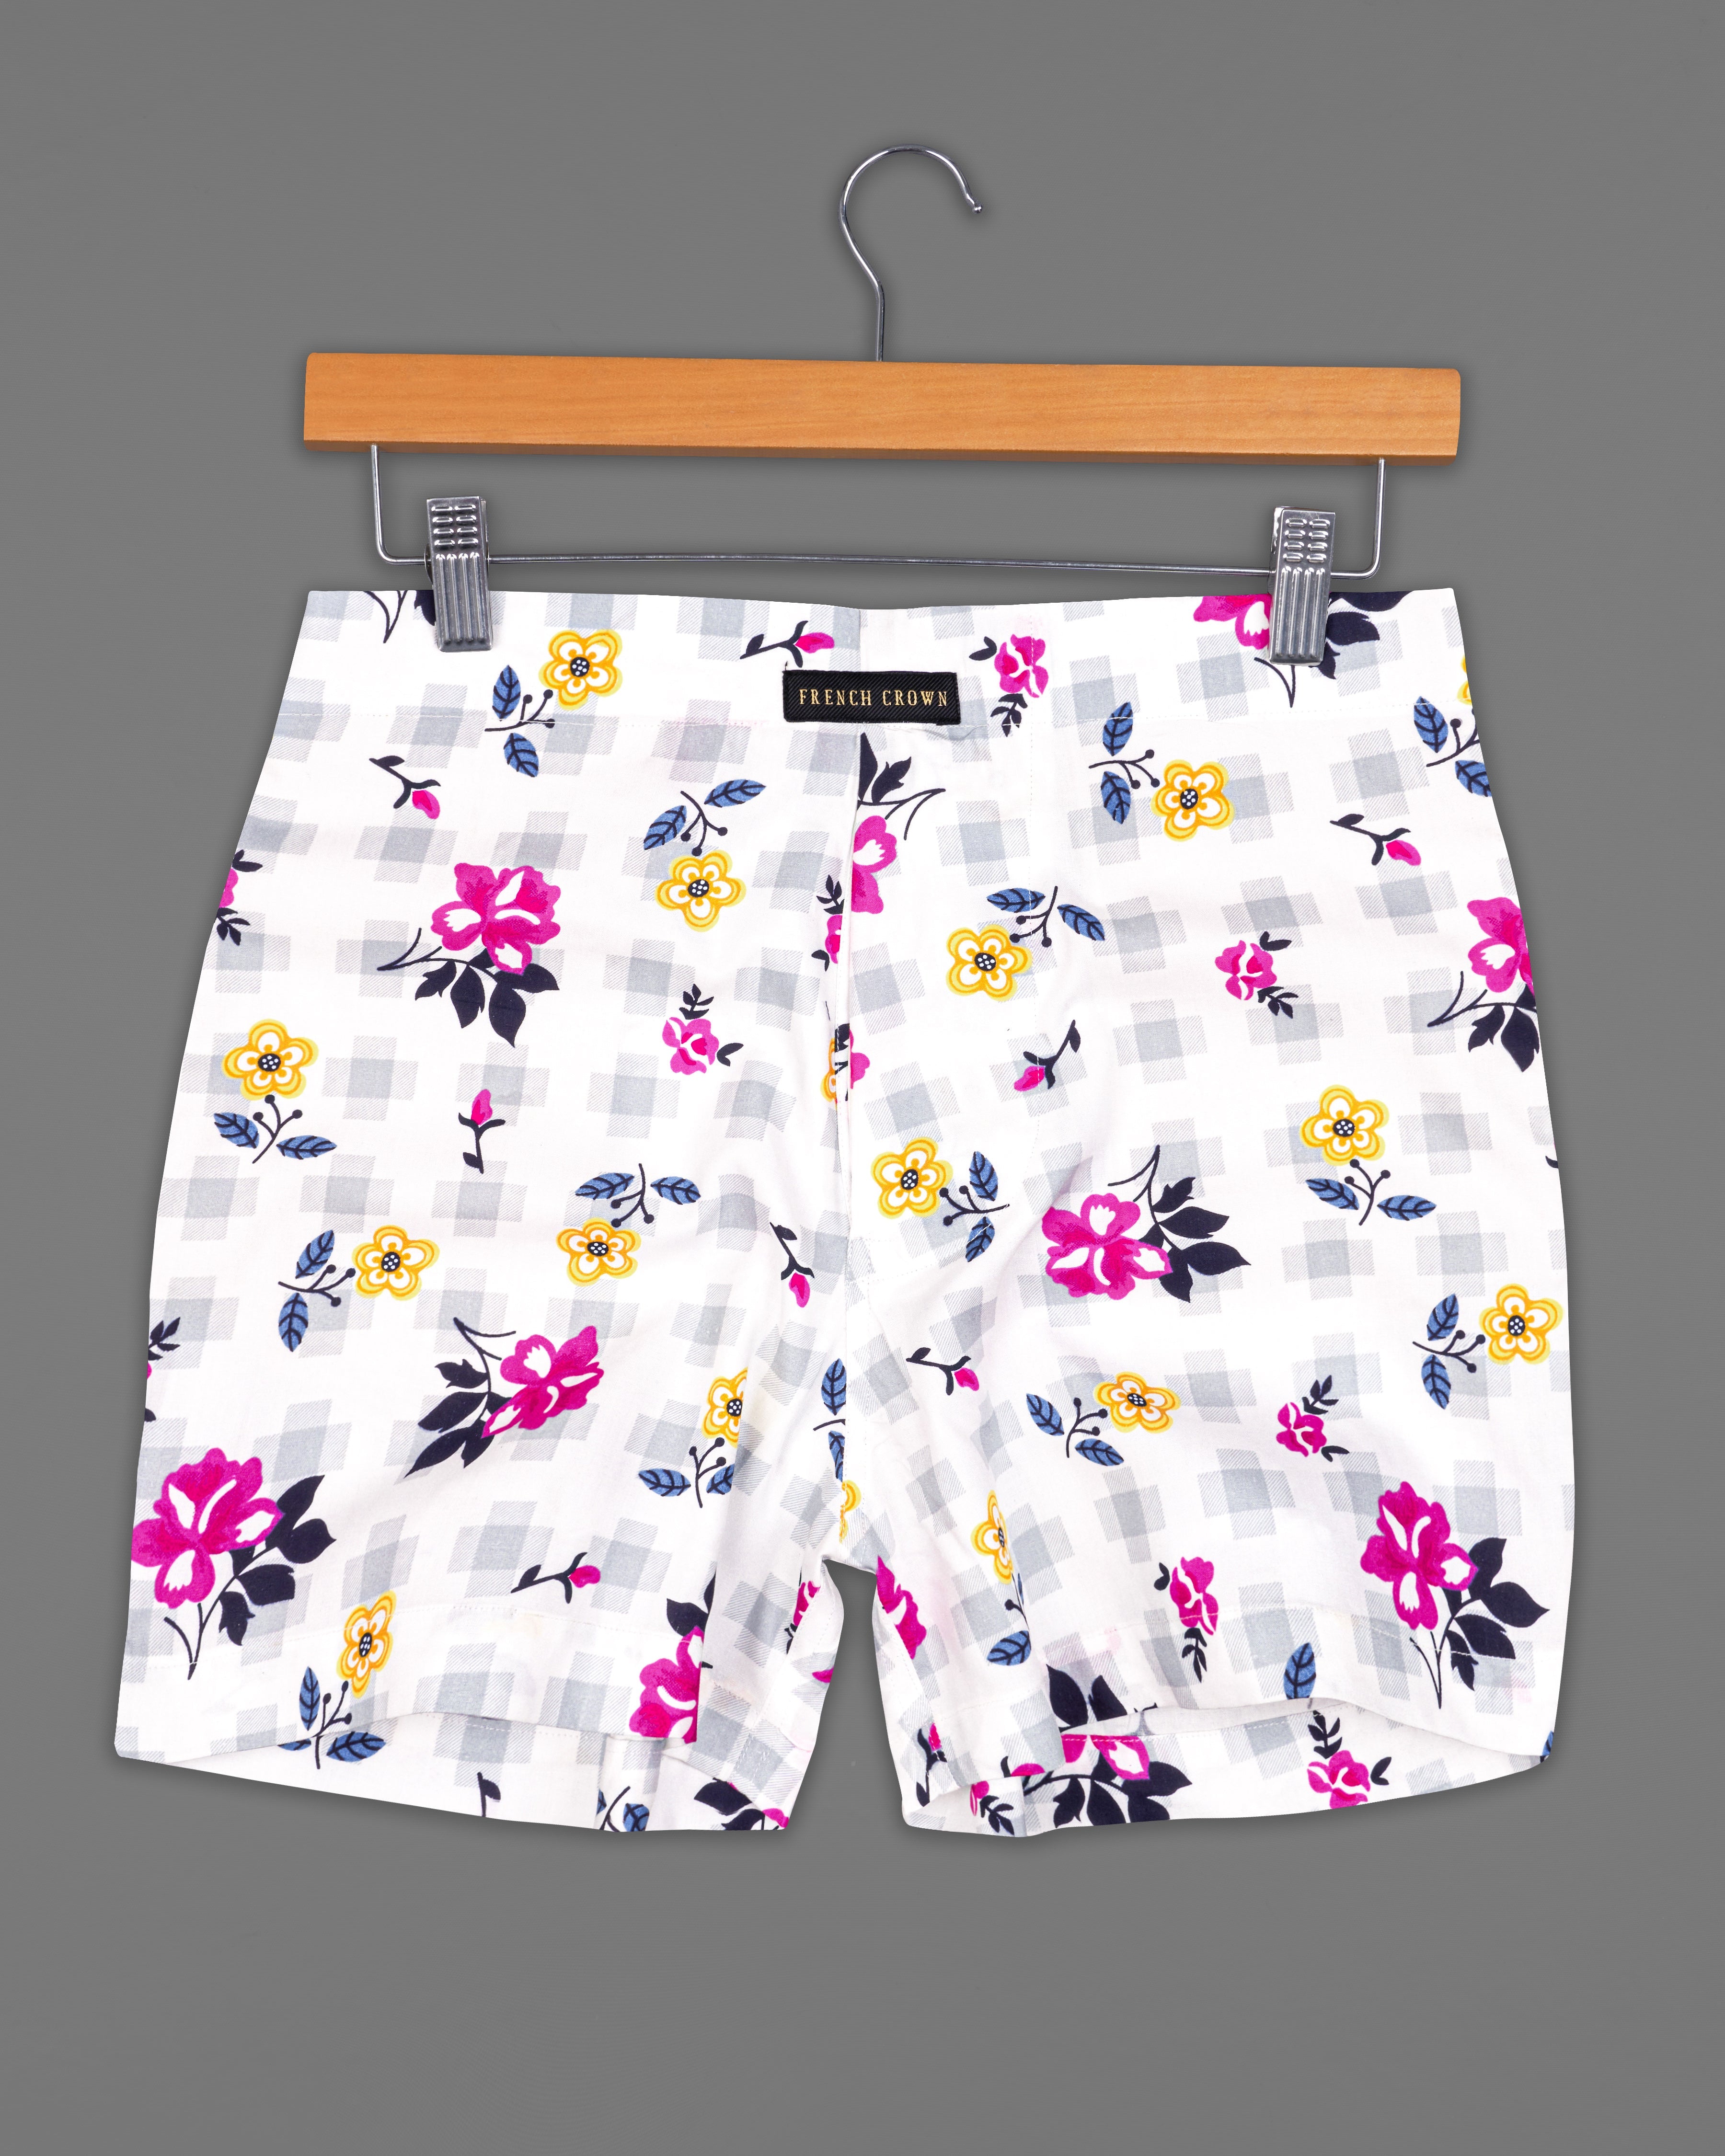 Bright White Floral Printed with Desert Storm Yellow Floral Printed Premium Cotton Boxers BX494-28, BX494-30, BX494-32, BX494-34, BX494-36, BX494-38, BX494-40, BX494-42, BX494-44